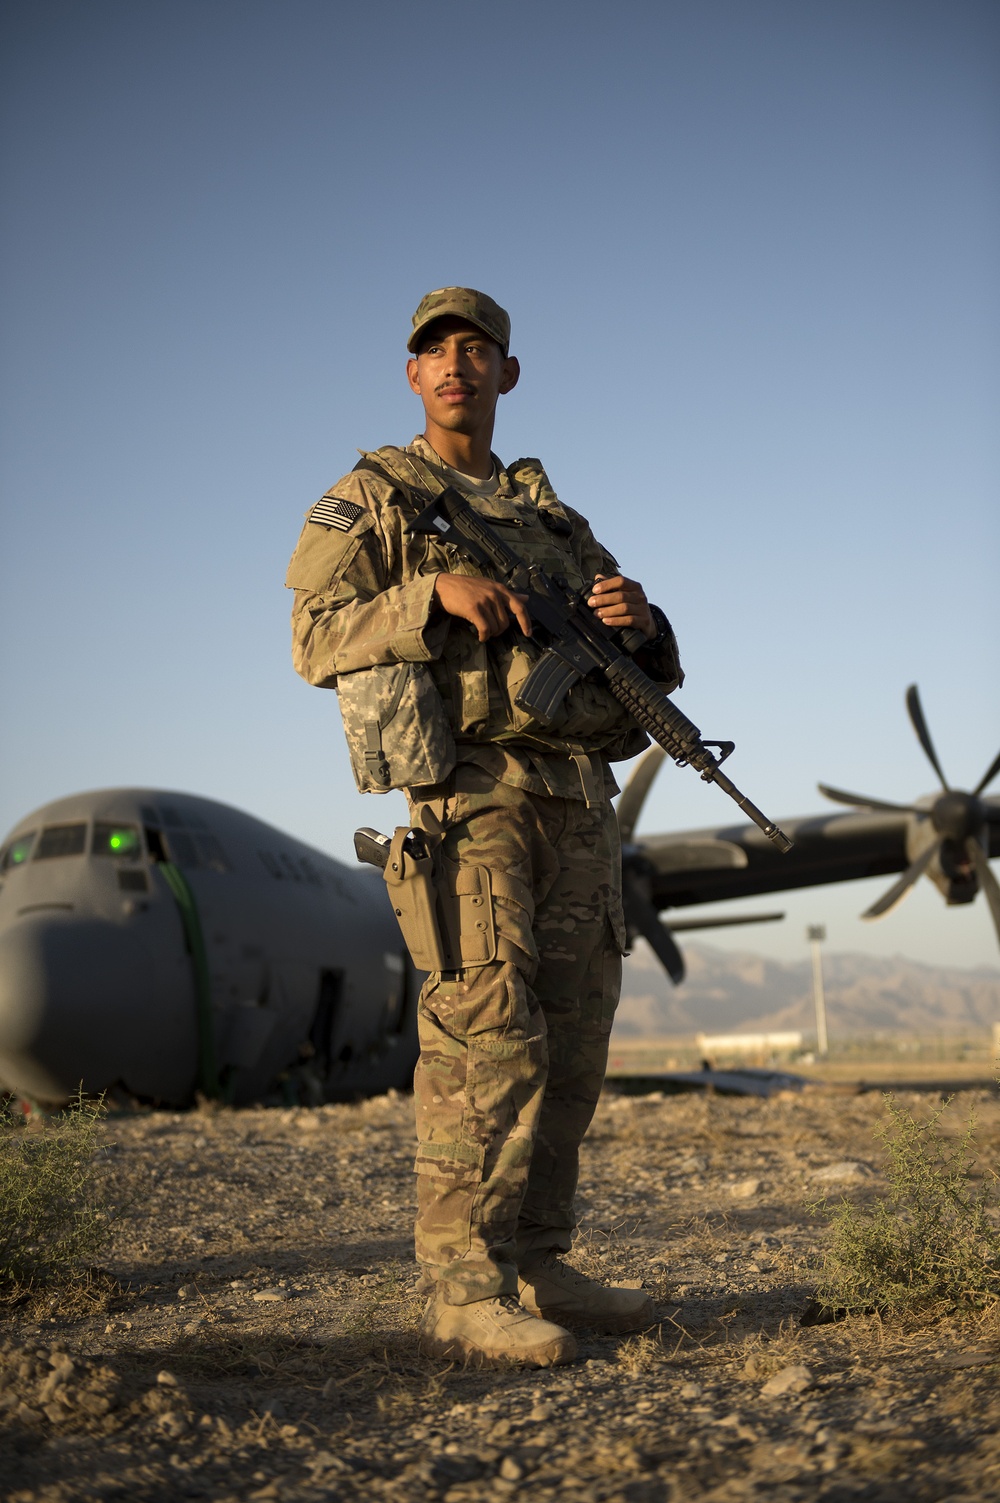 Guarding a plane in Afghanistan